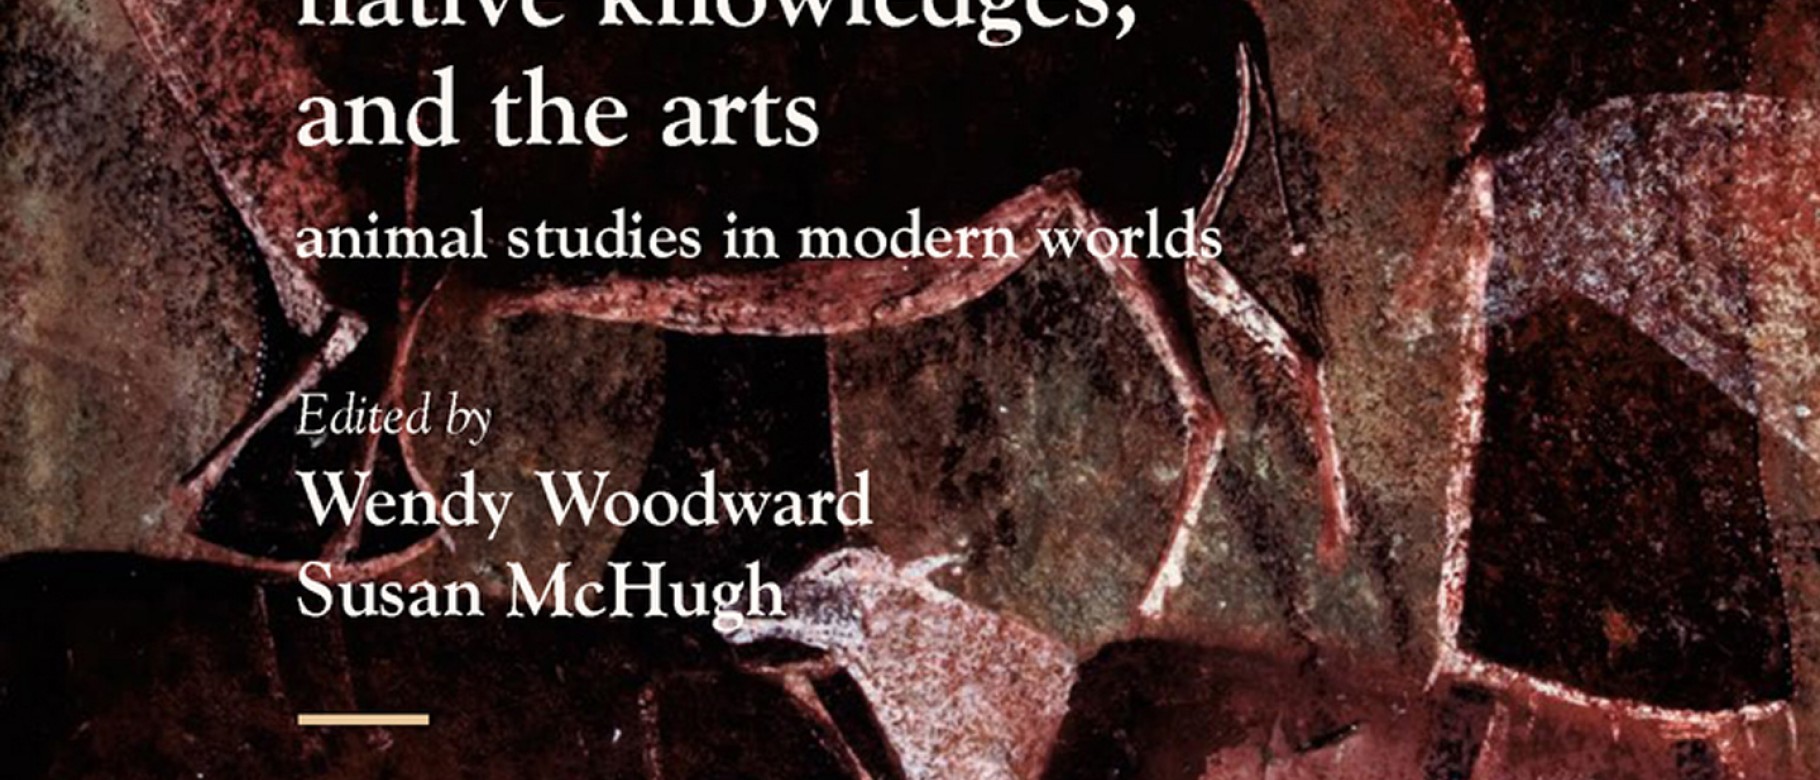 Book cover of Indigenous Creatures: Native Knowledges, Animals, and the Arts in Modern Worlds, Wendy Woodward, Susan McHugh, eds